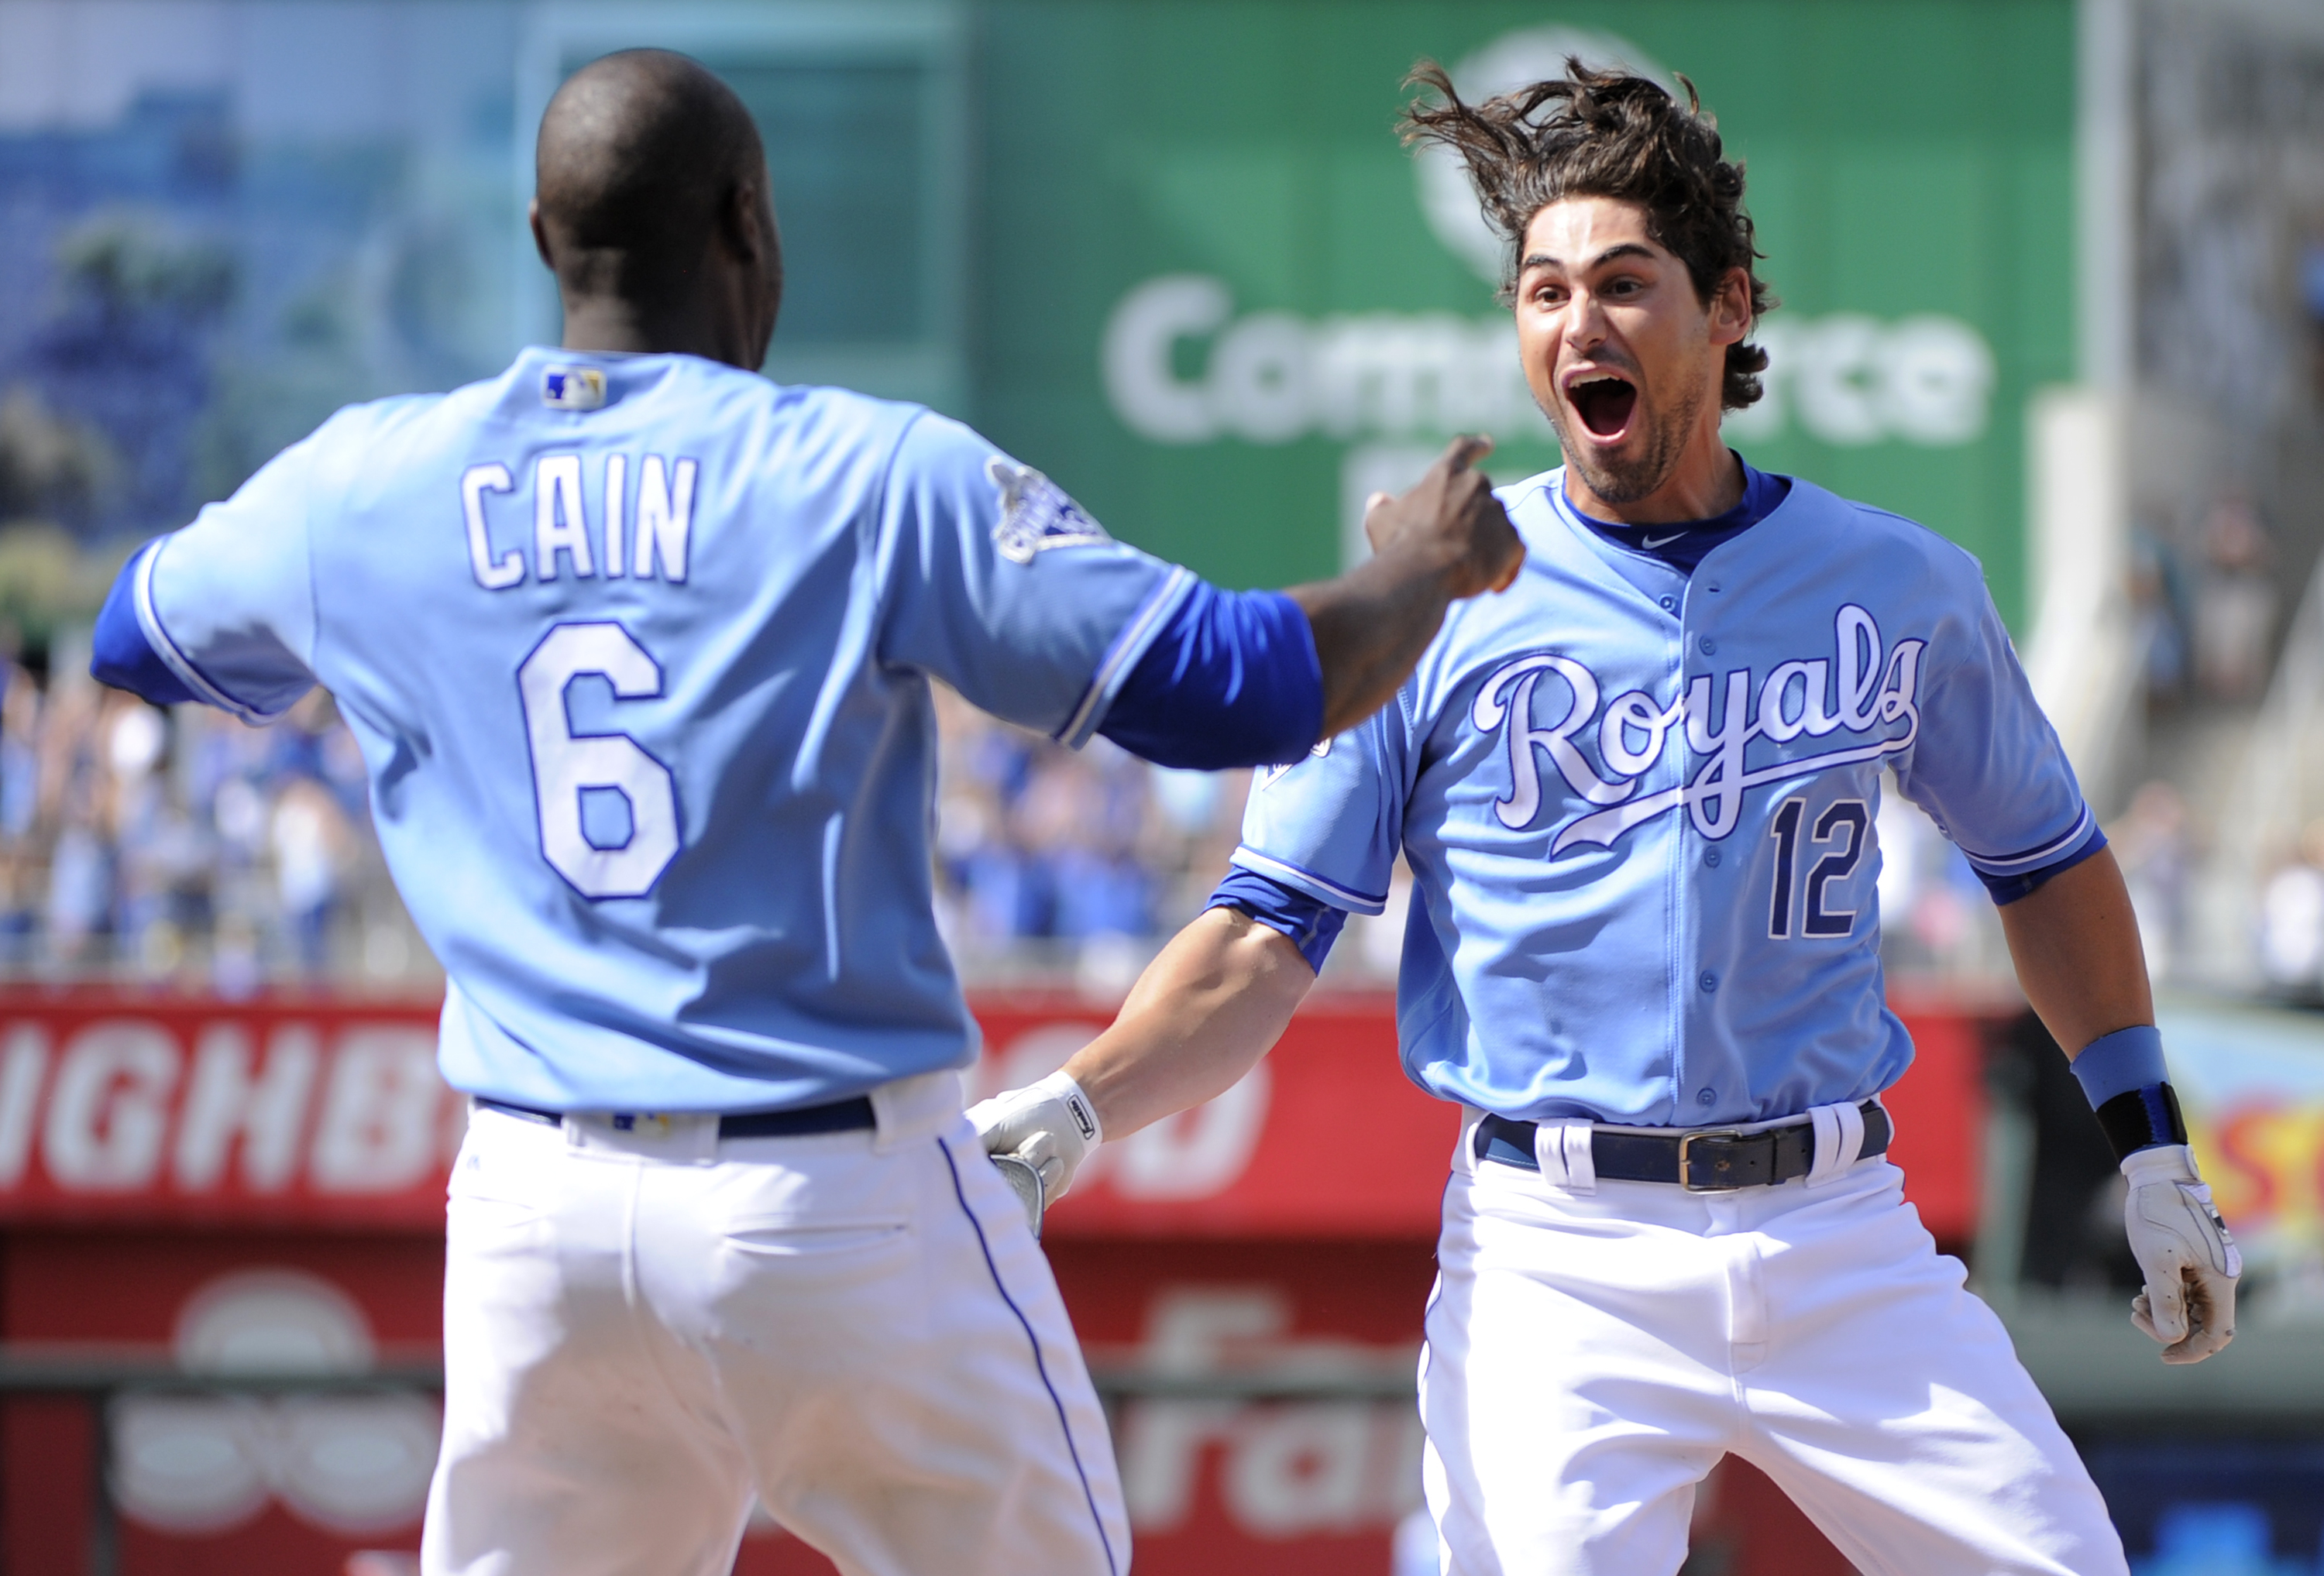 Royals complete wild comeback vs. White Sox on (another) walk-off